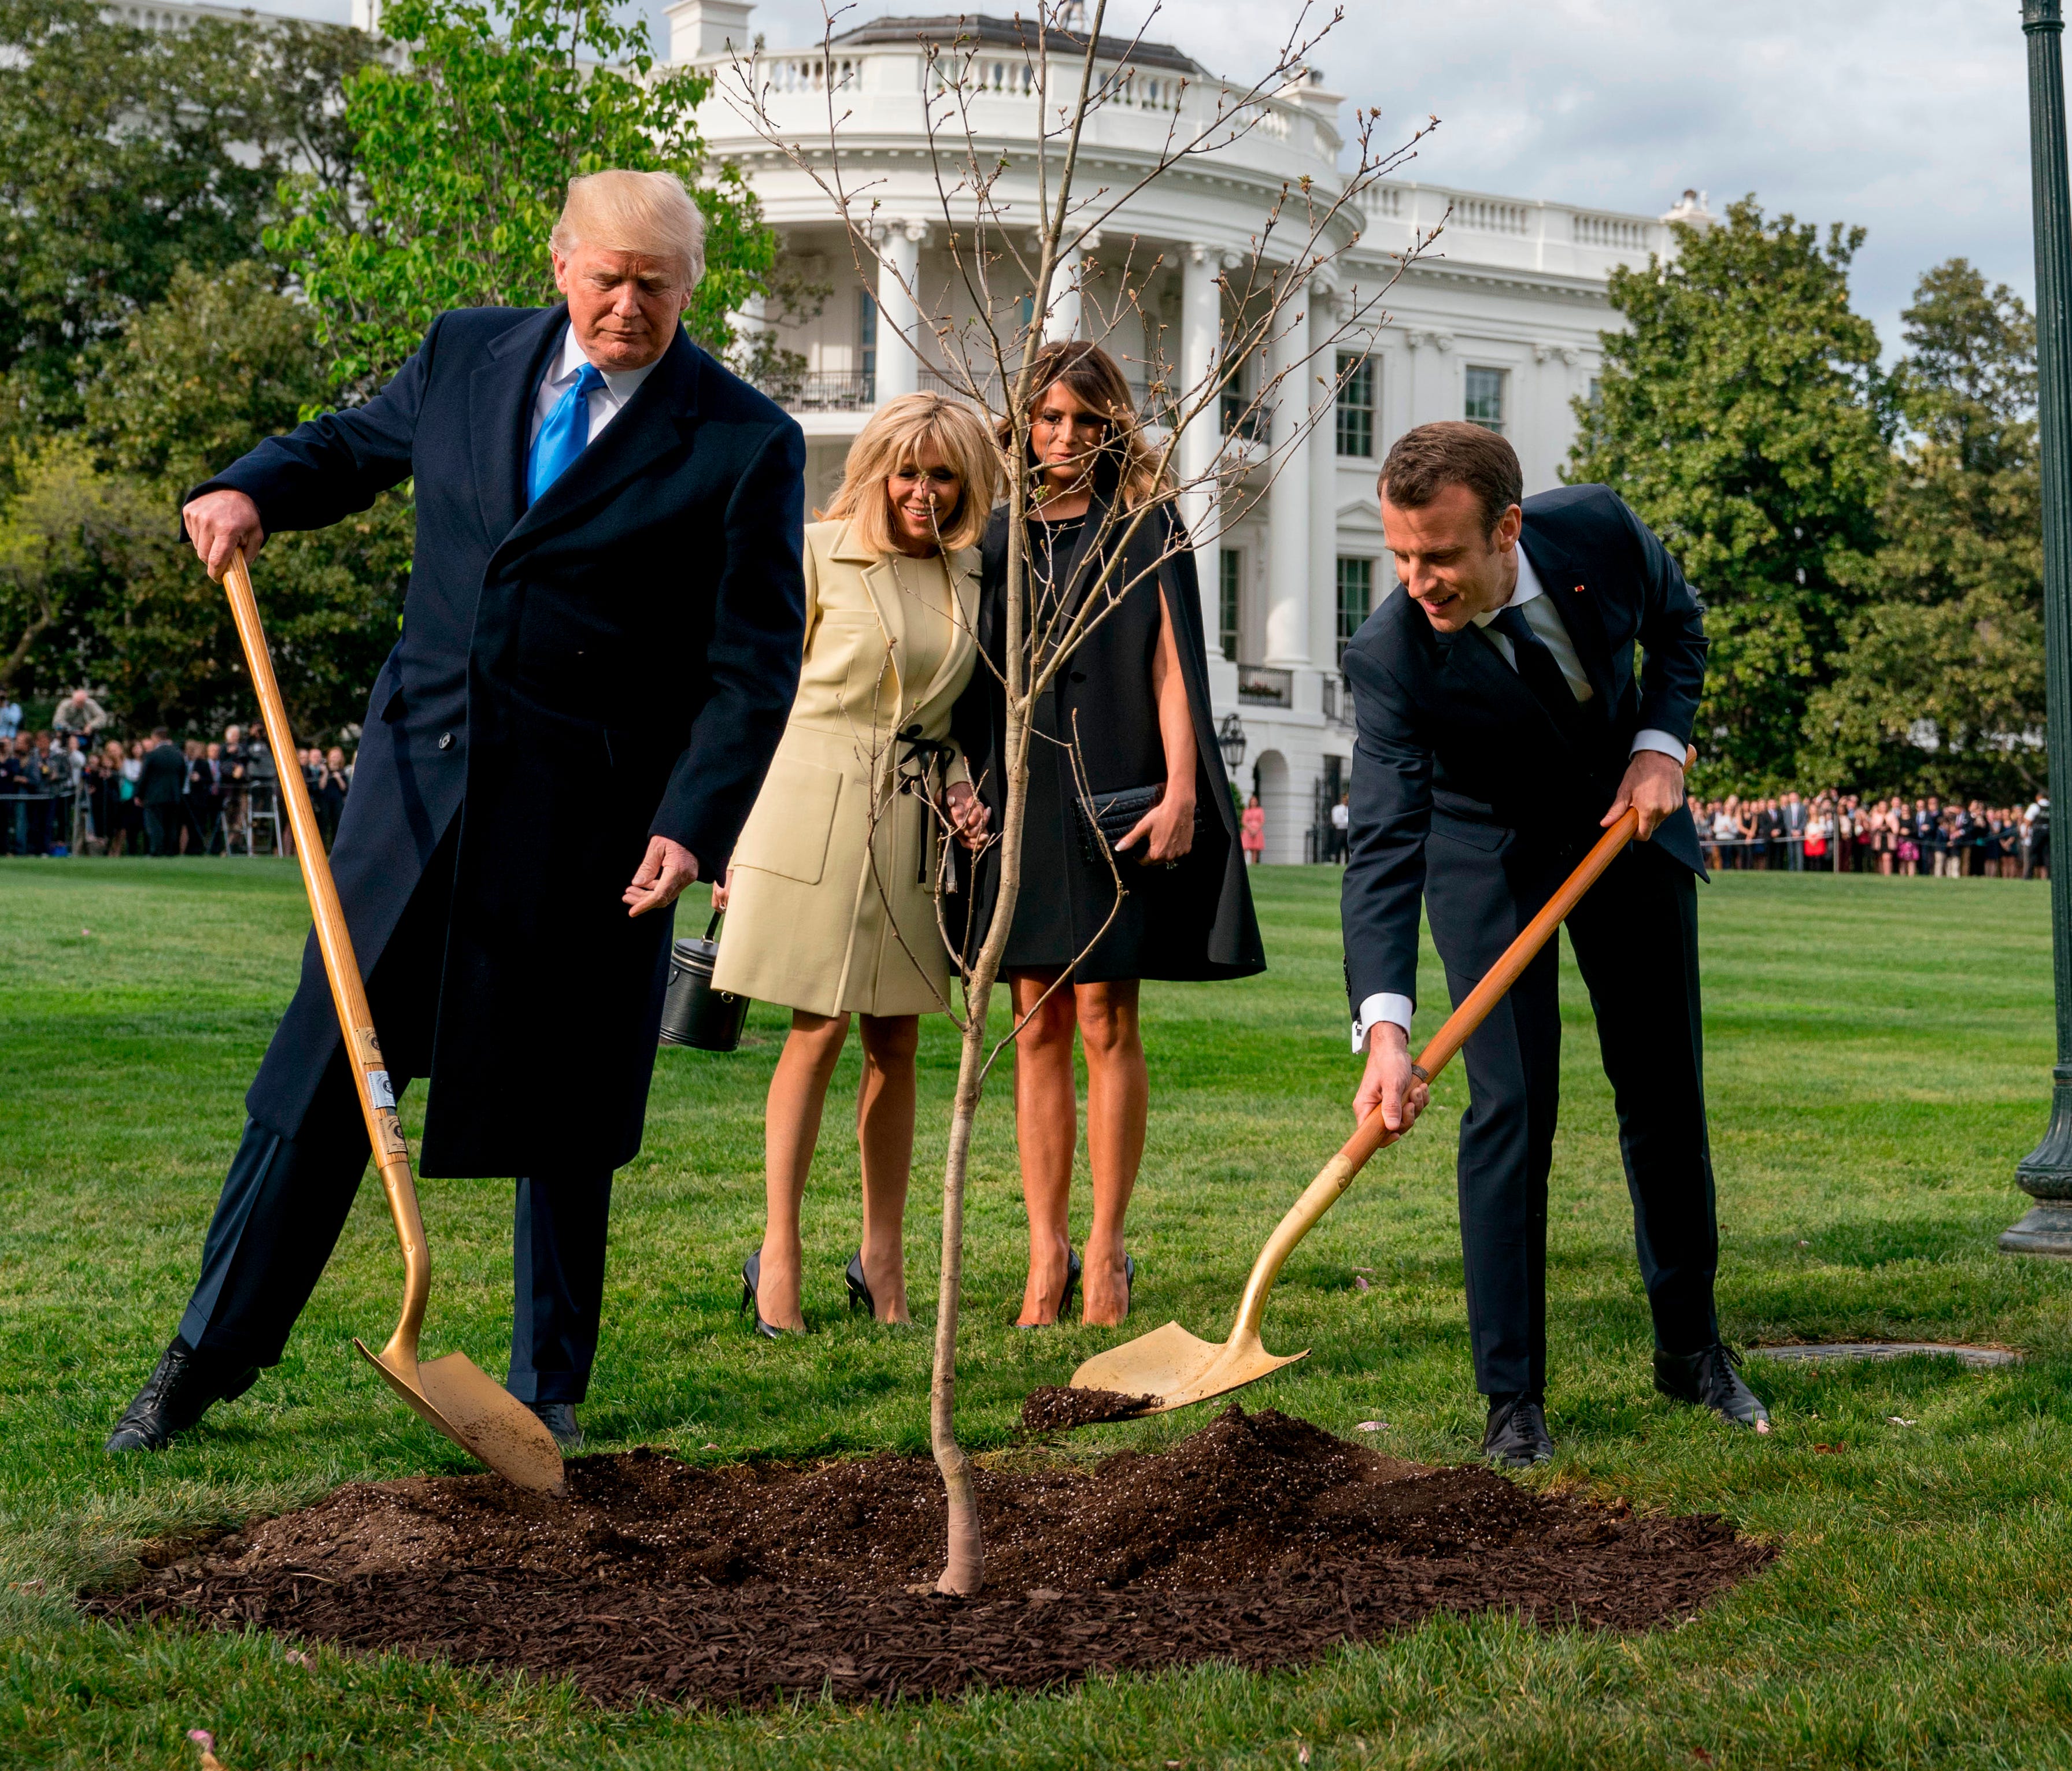 First lady Melania Trump and Brigitte Macron watch April 23 as President Trump and French President Emmanuel Macron participate in a tree planting ceremony on the South Lawn of the White House.